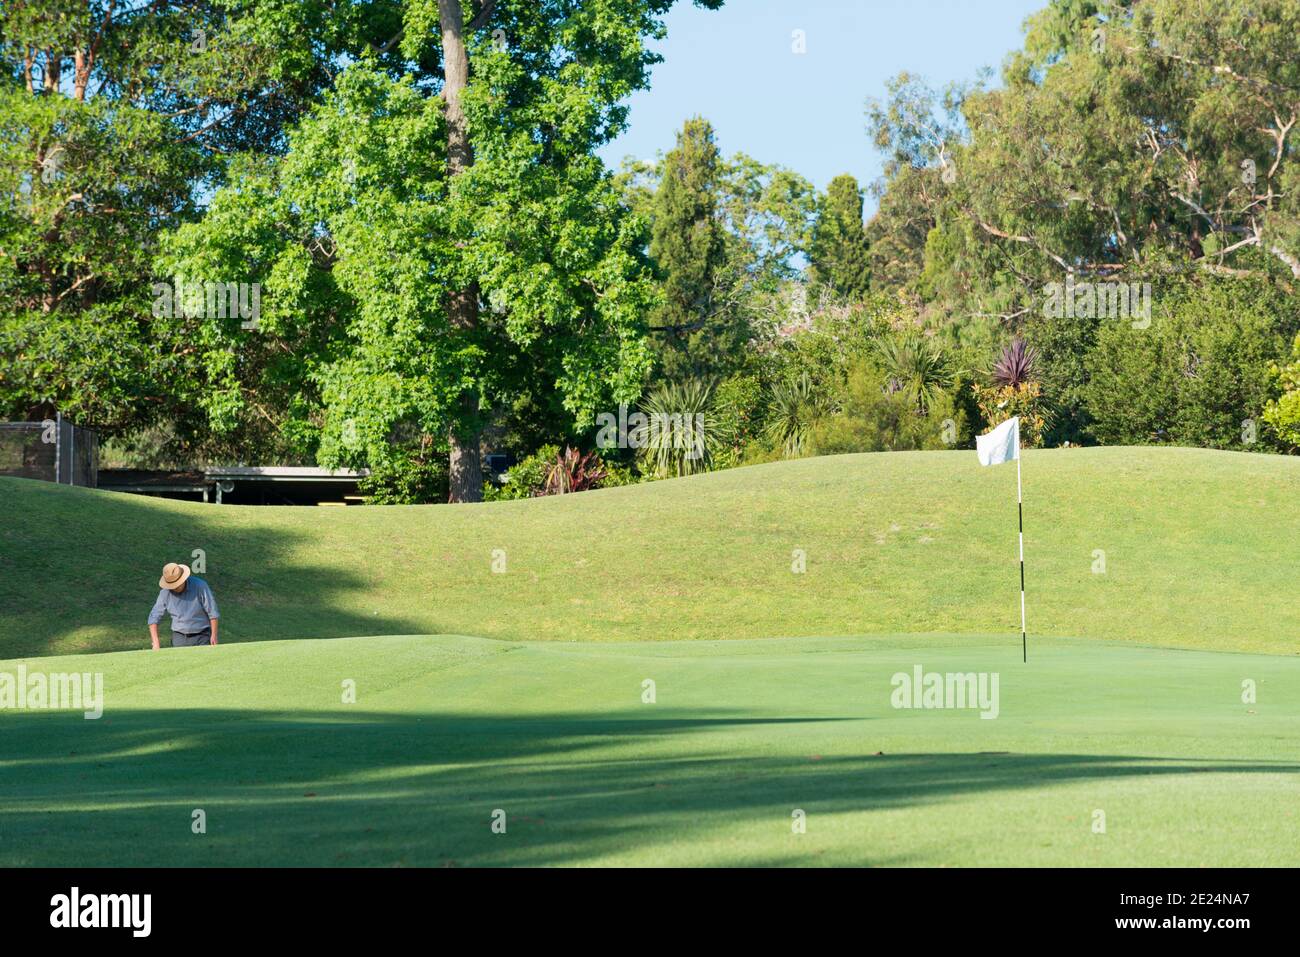 An older male golfer wearing a wide brim hat appears waist deep on a putting green at Gordon Gold Course on the North Shore of Sydney, Australia Stock Photo